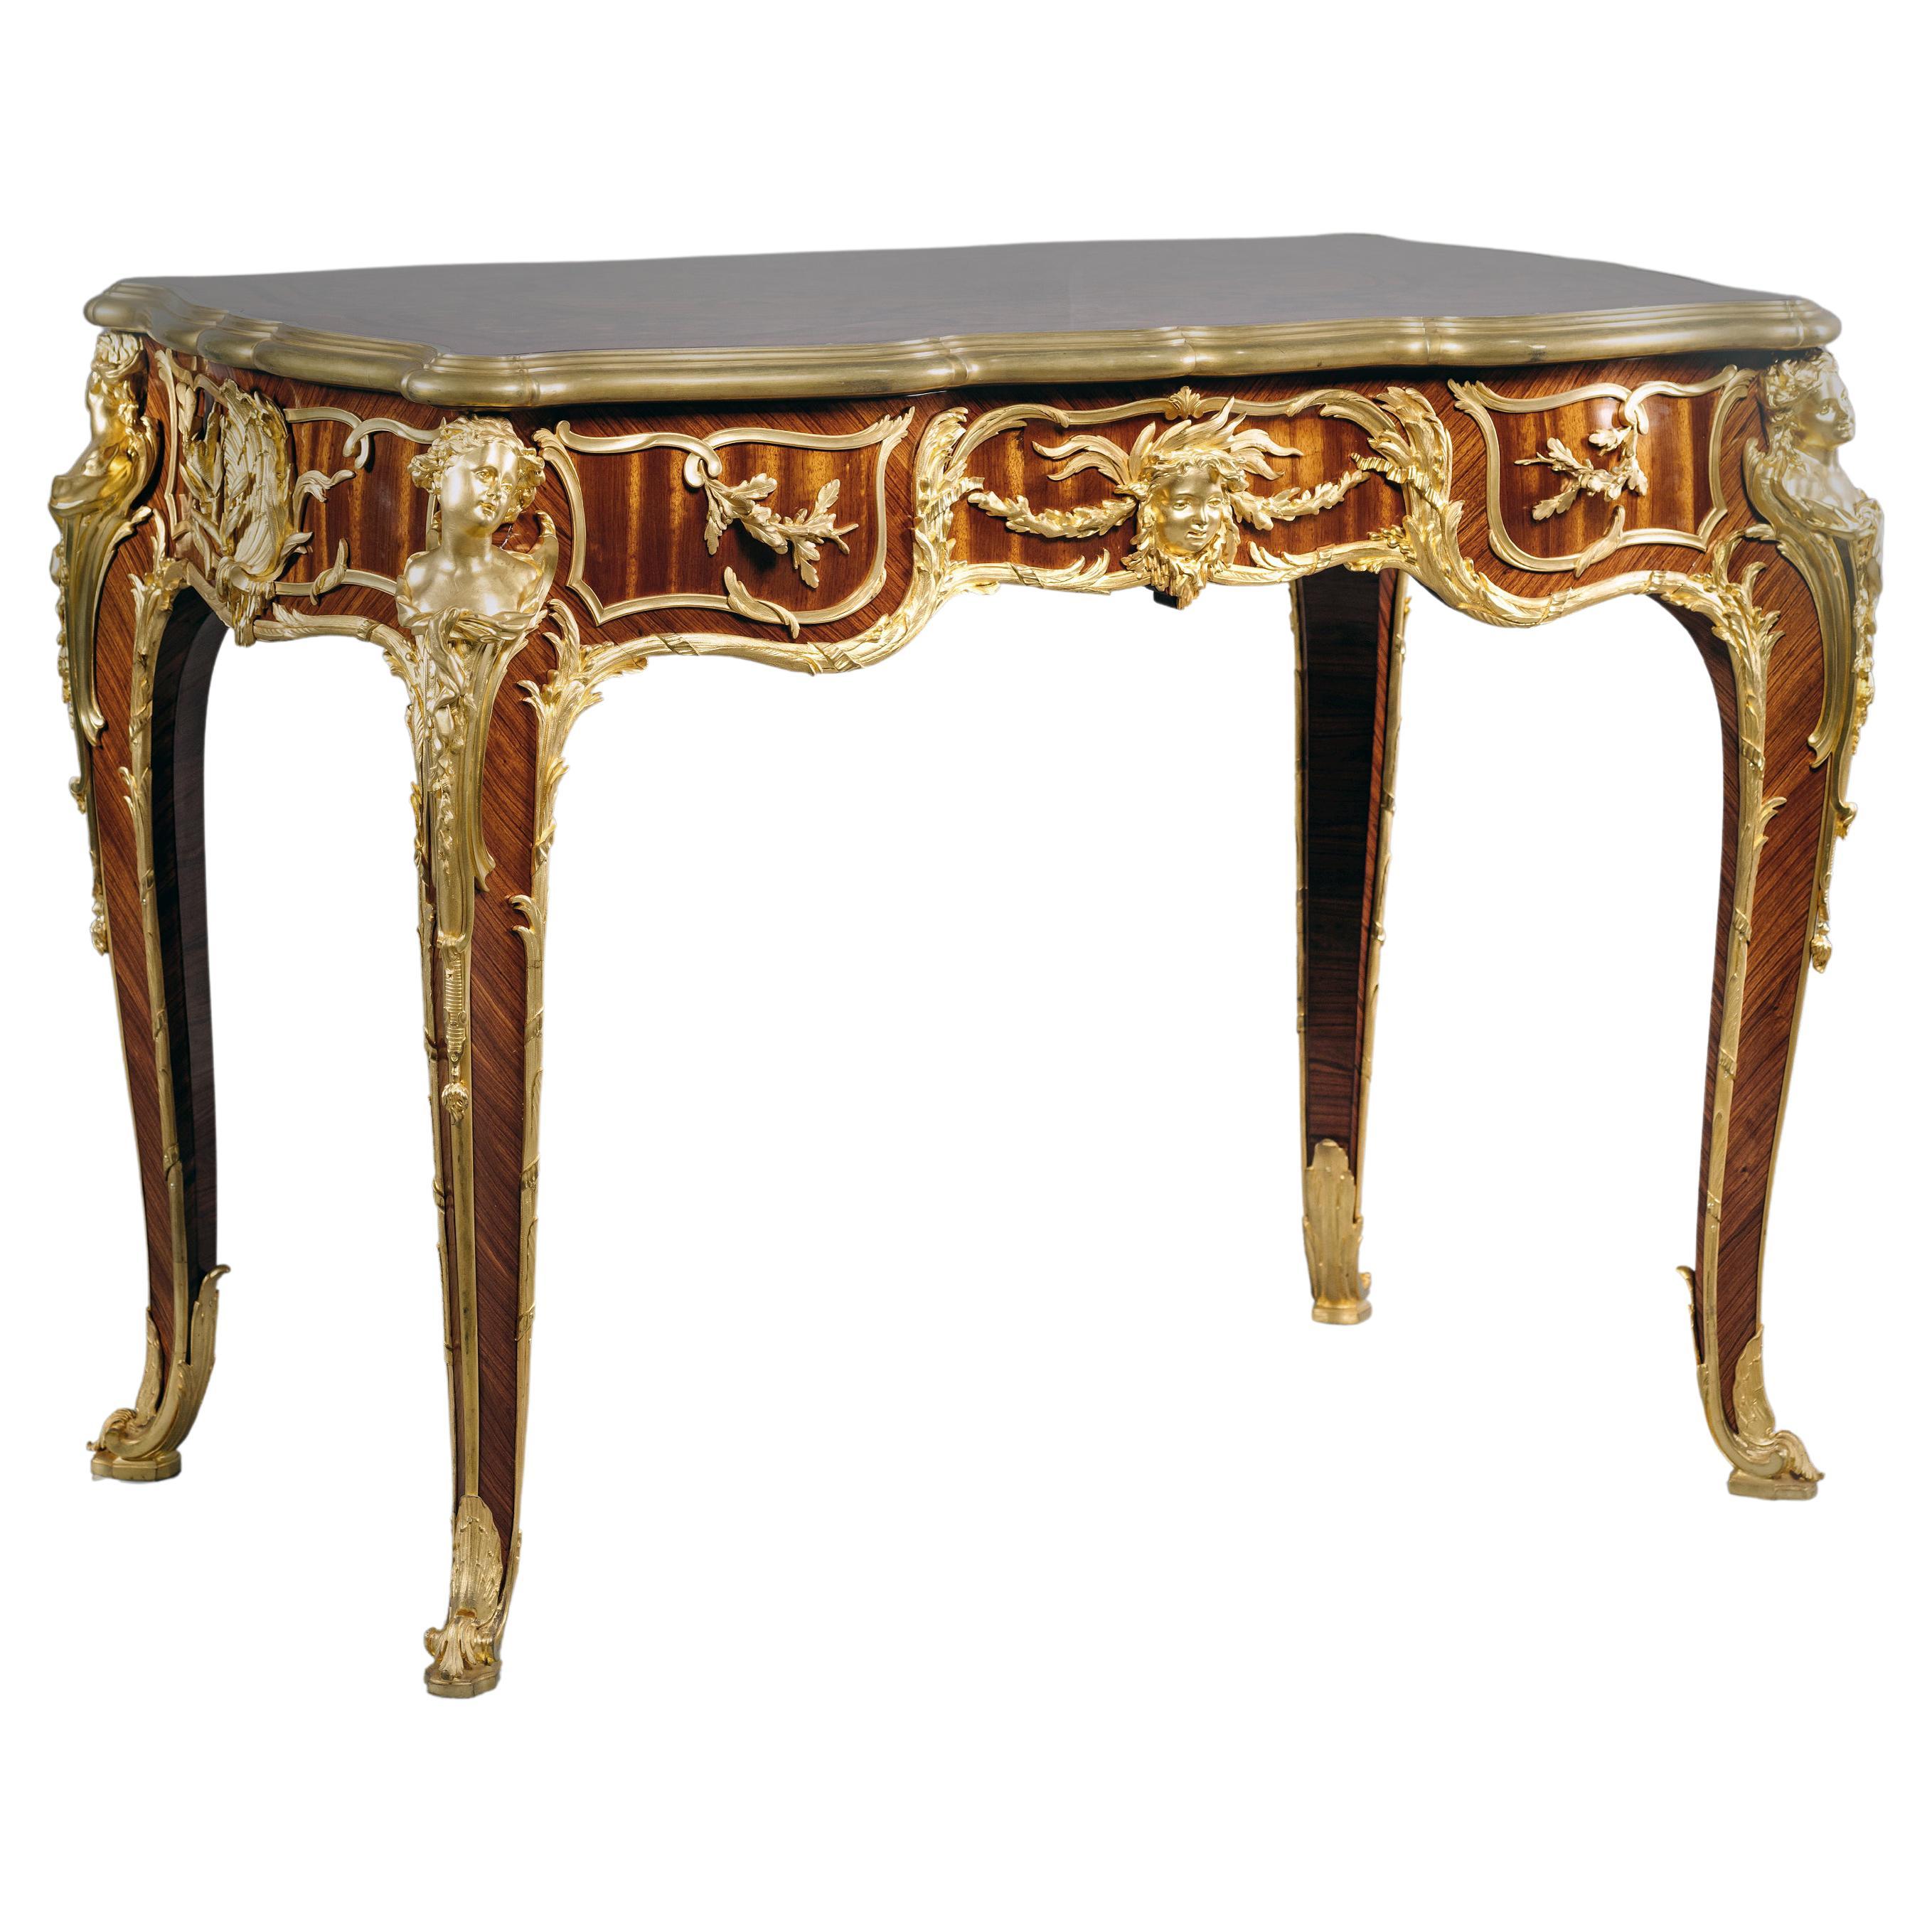 Rare and Important Louis XV Style Gilt-Bronze Centre Table by François Linke